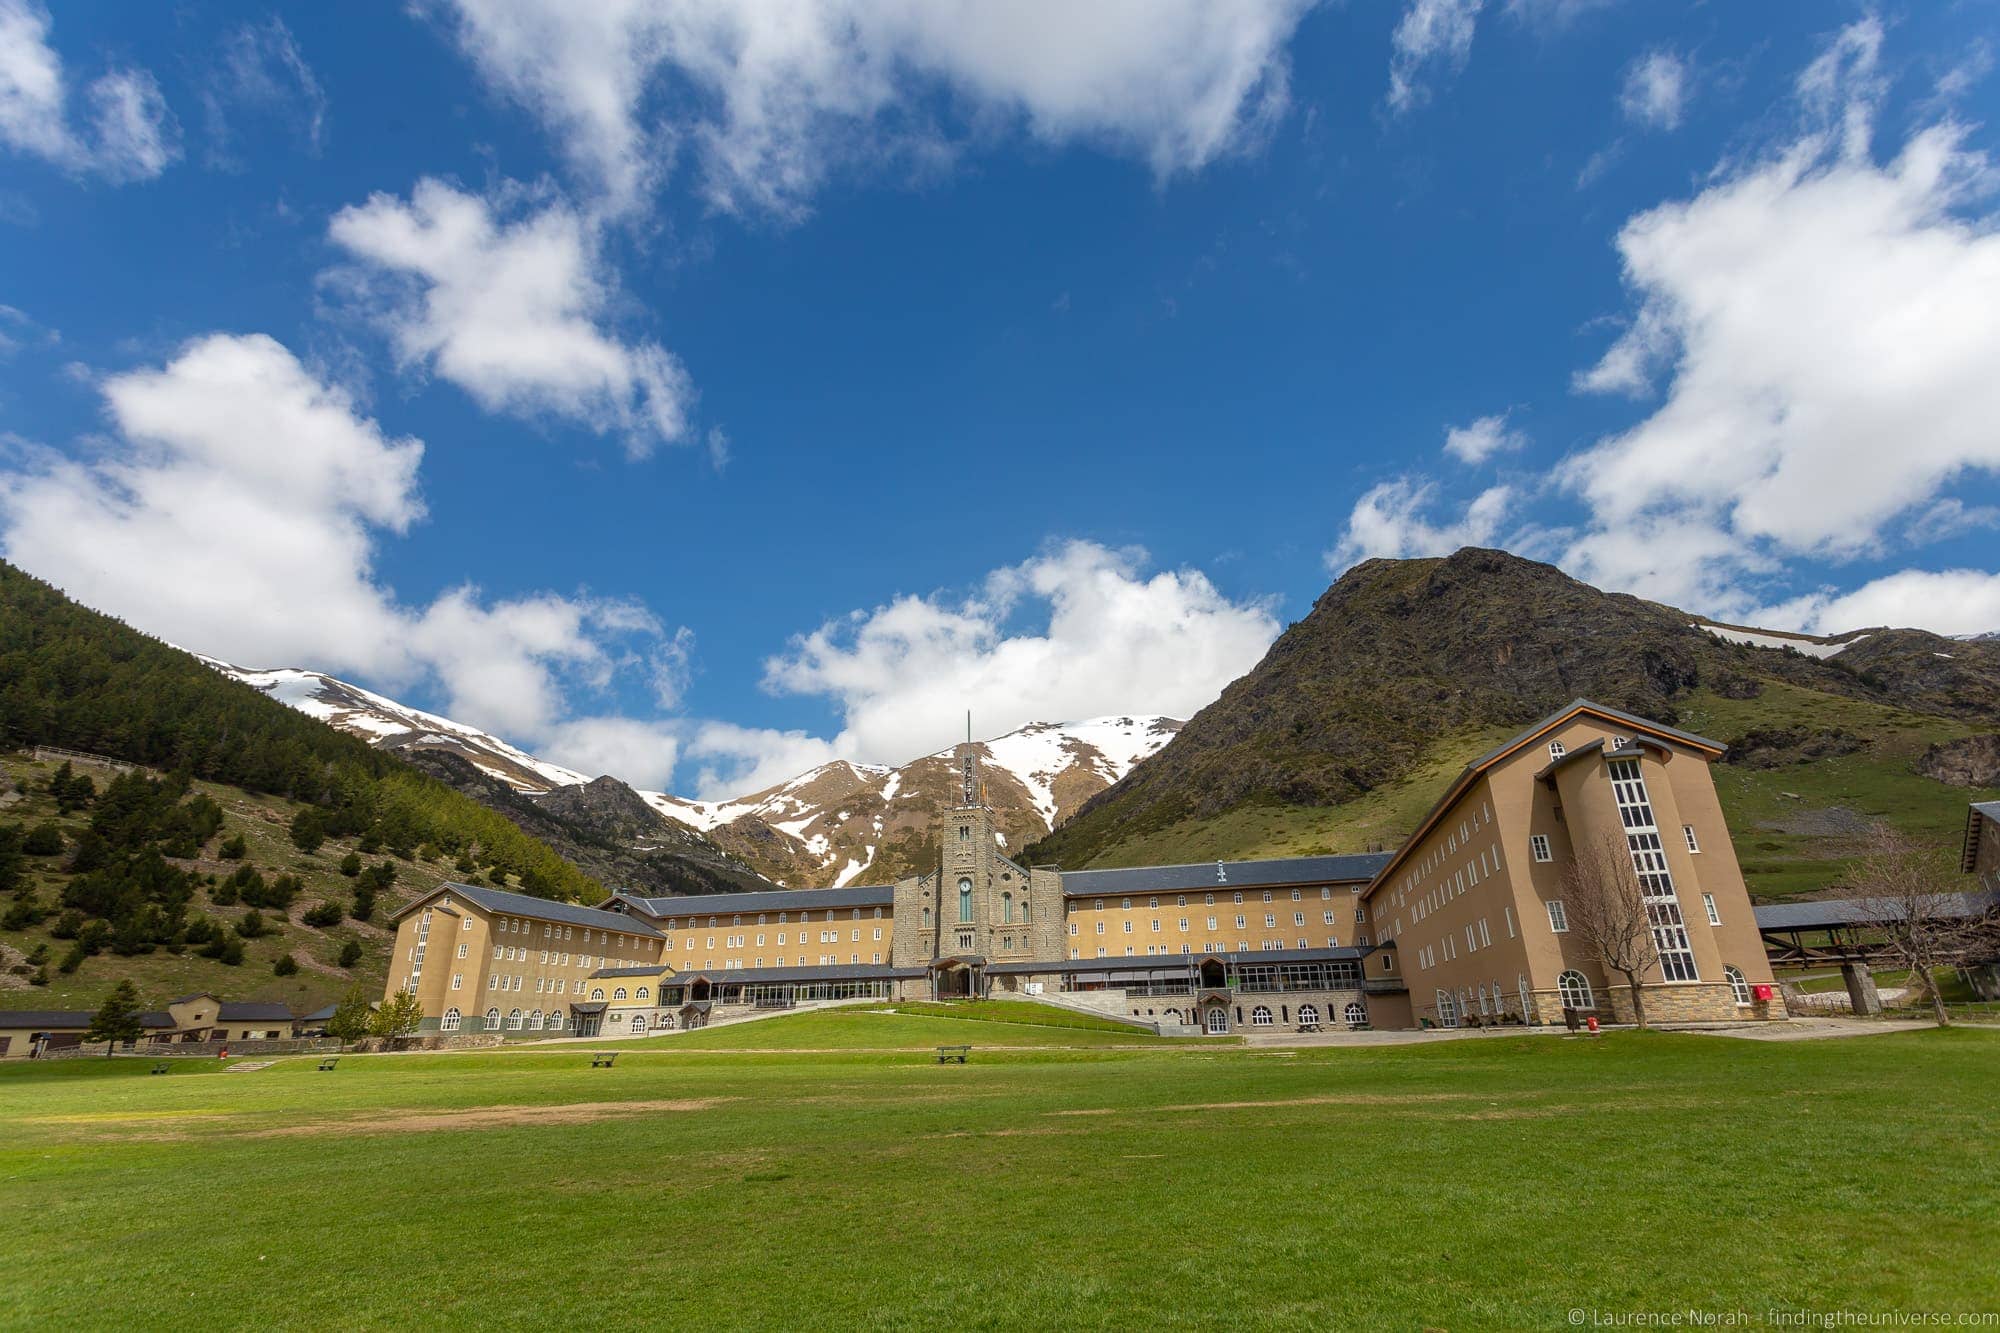 Visiting the Vall de Nuria in the Pyrenees